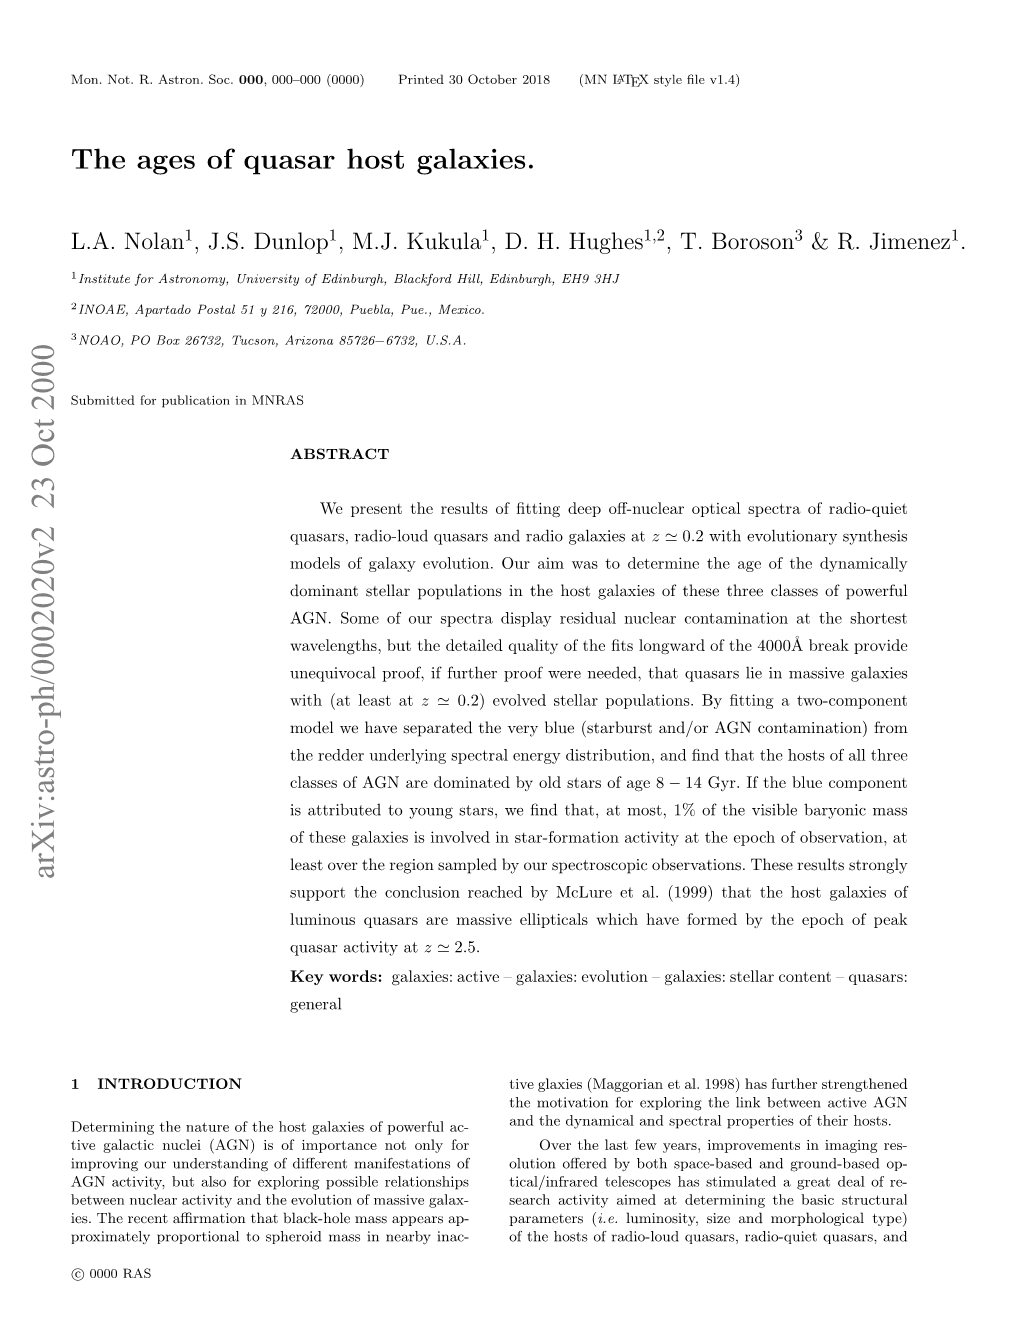 The Ages of Quasar Host Galaxies